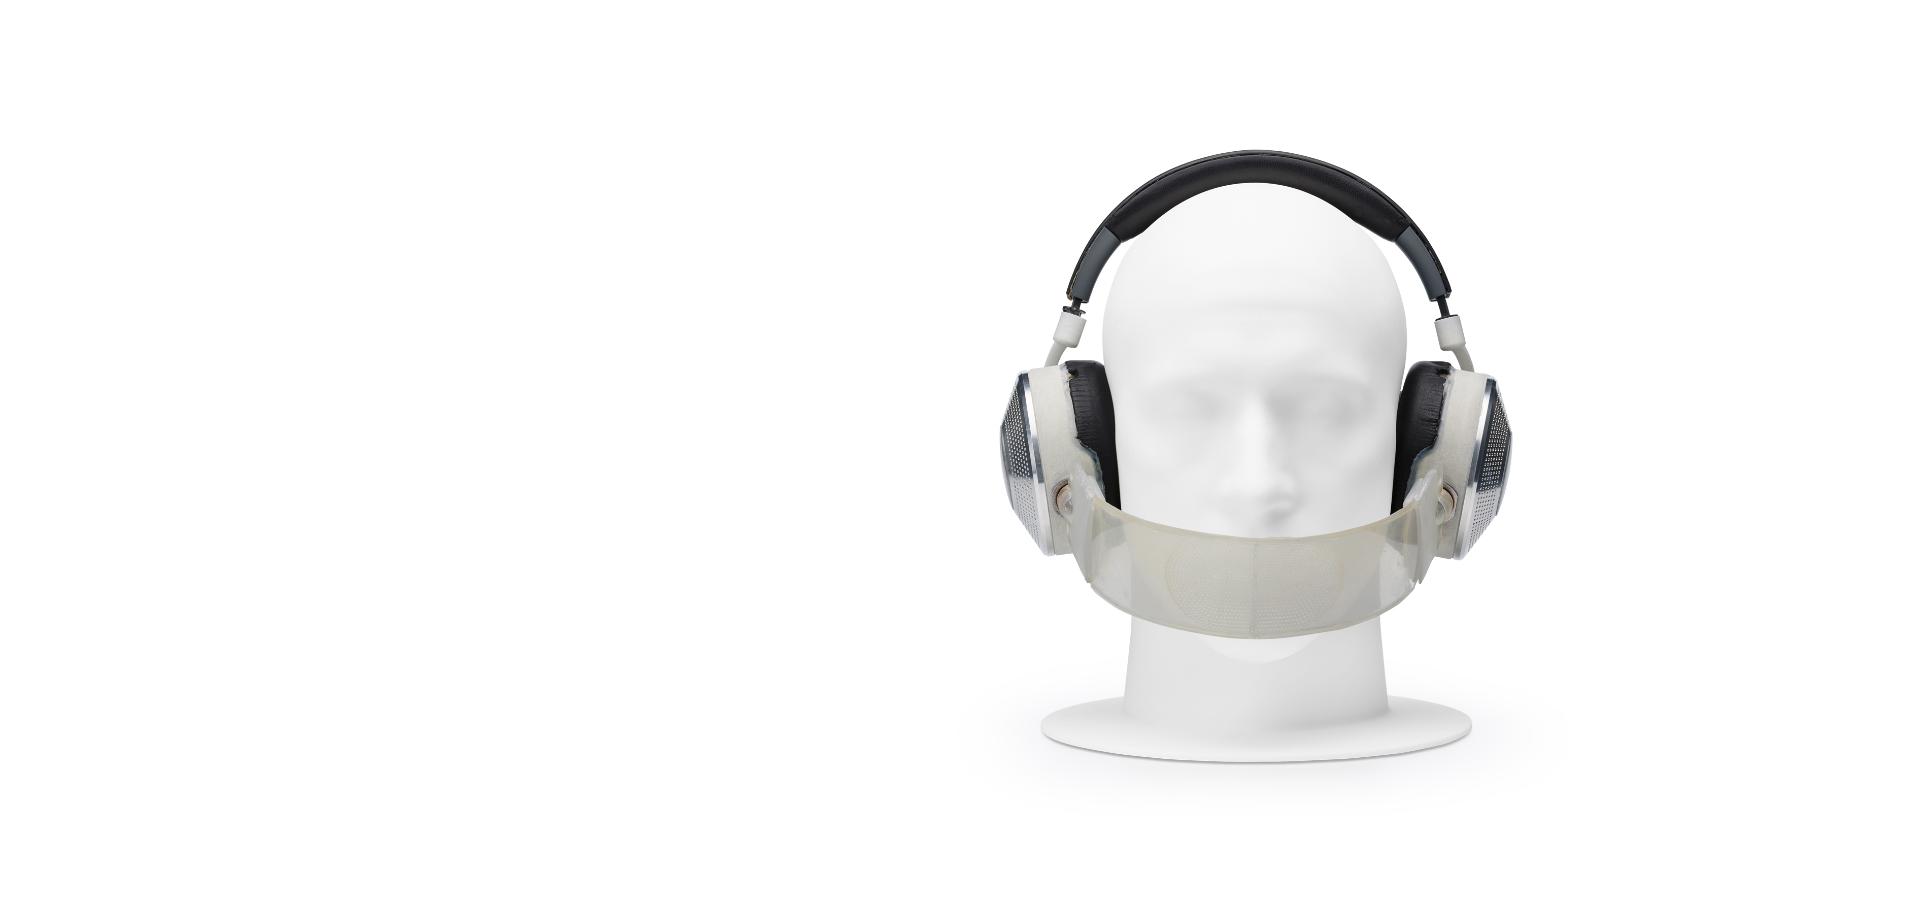 manikin head wearing prototype headphones, with band across nose and mouth.